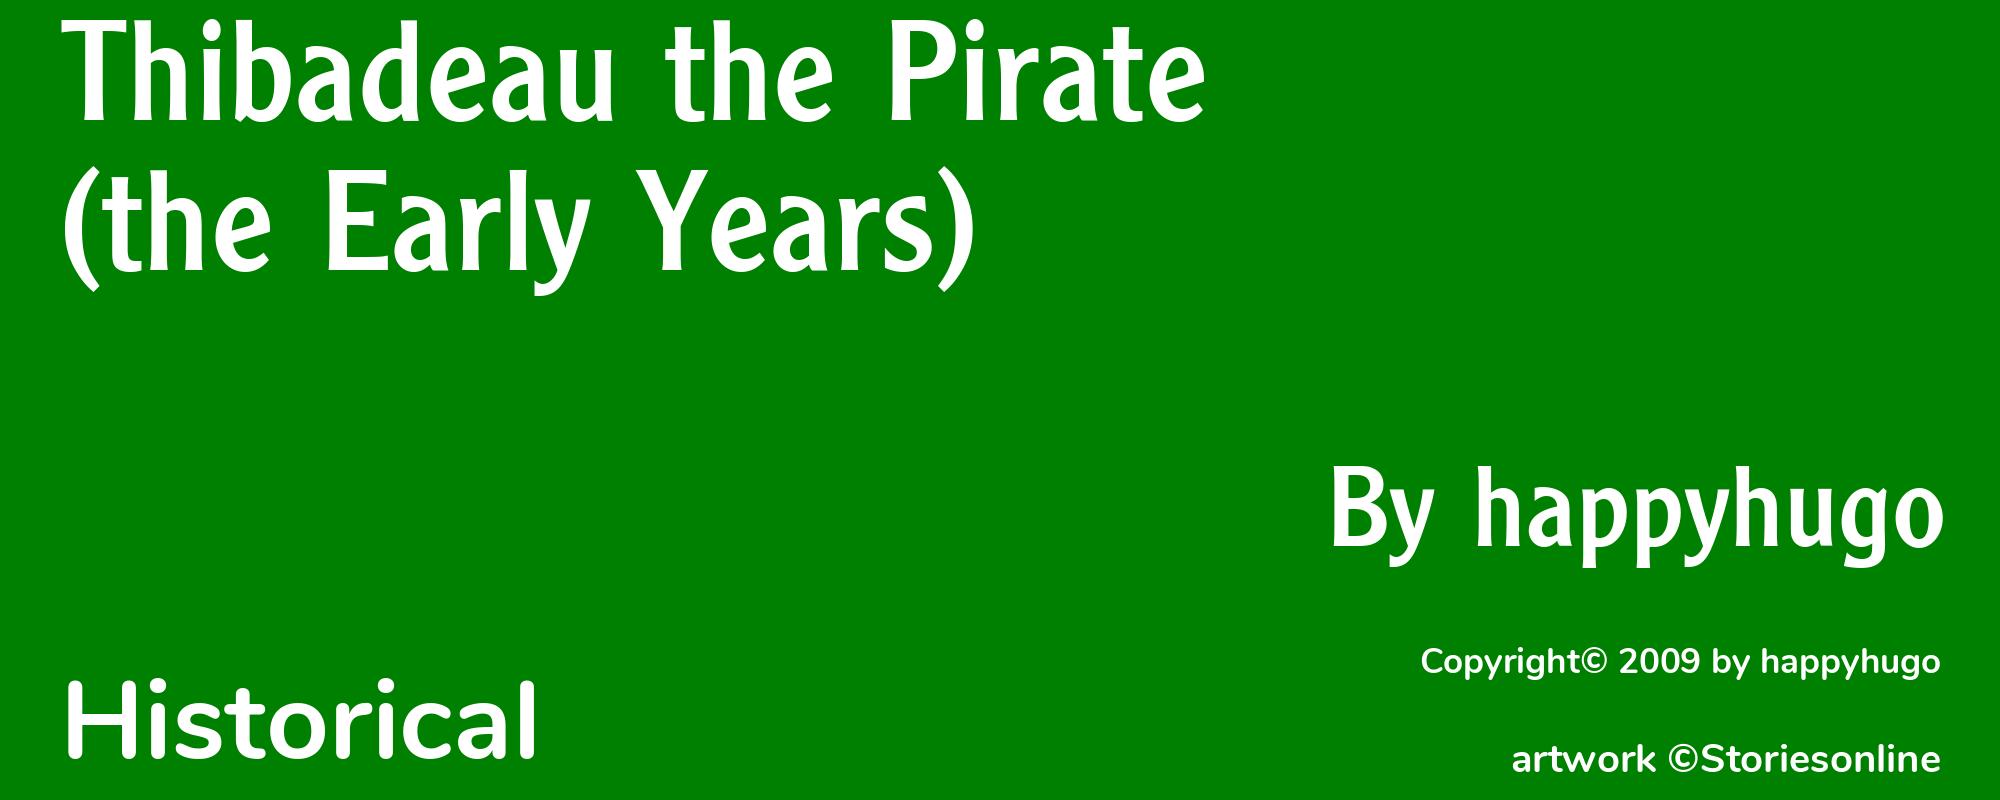 Thibadeau the Pirate (the Early Years) - Cover